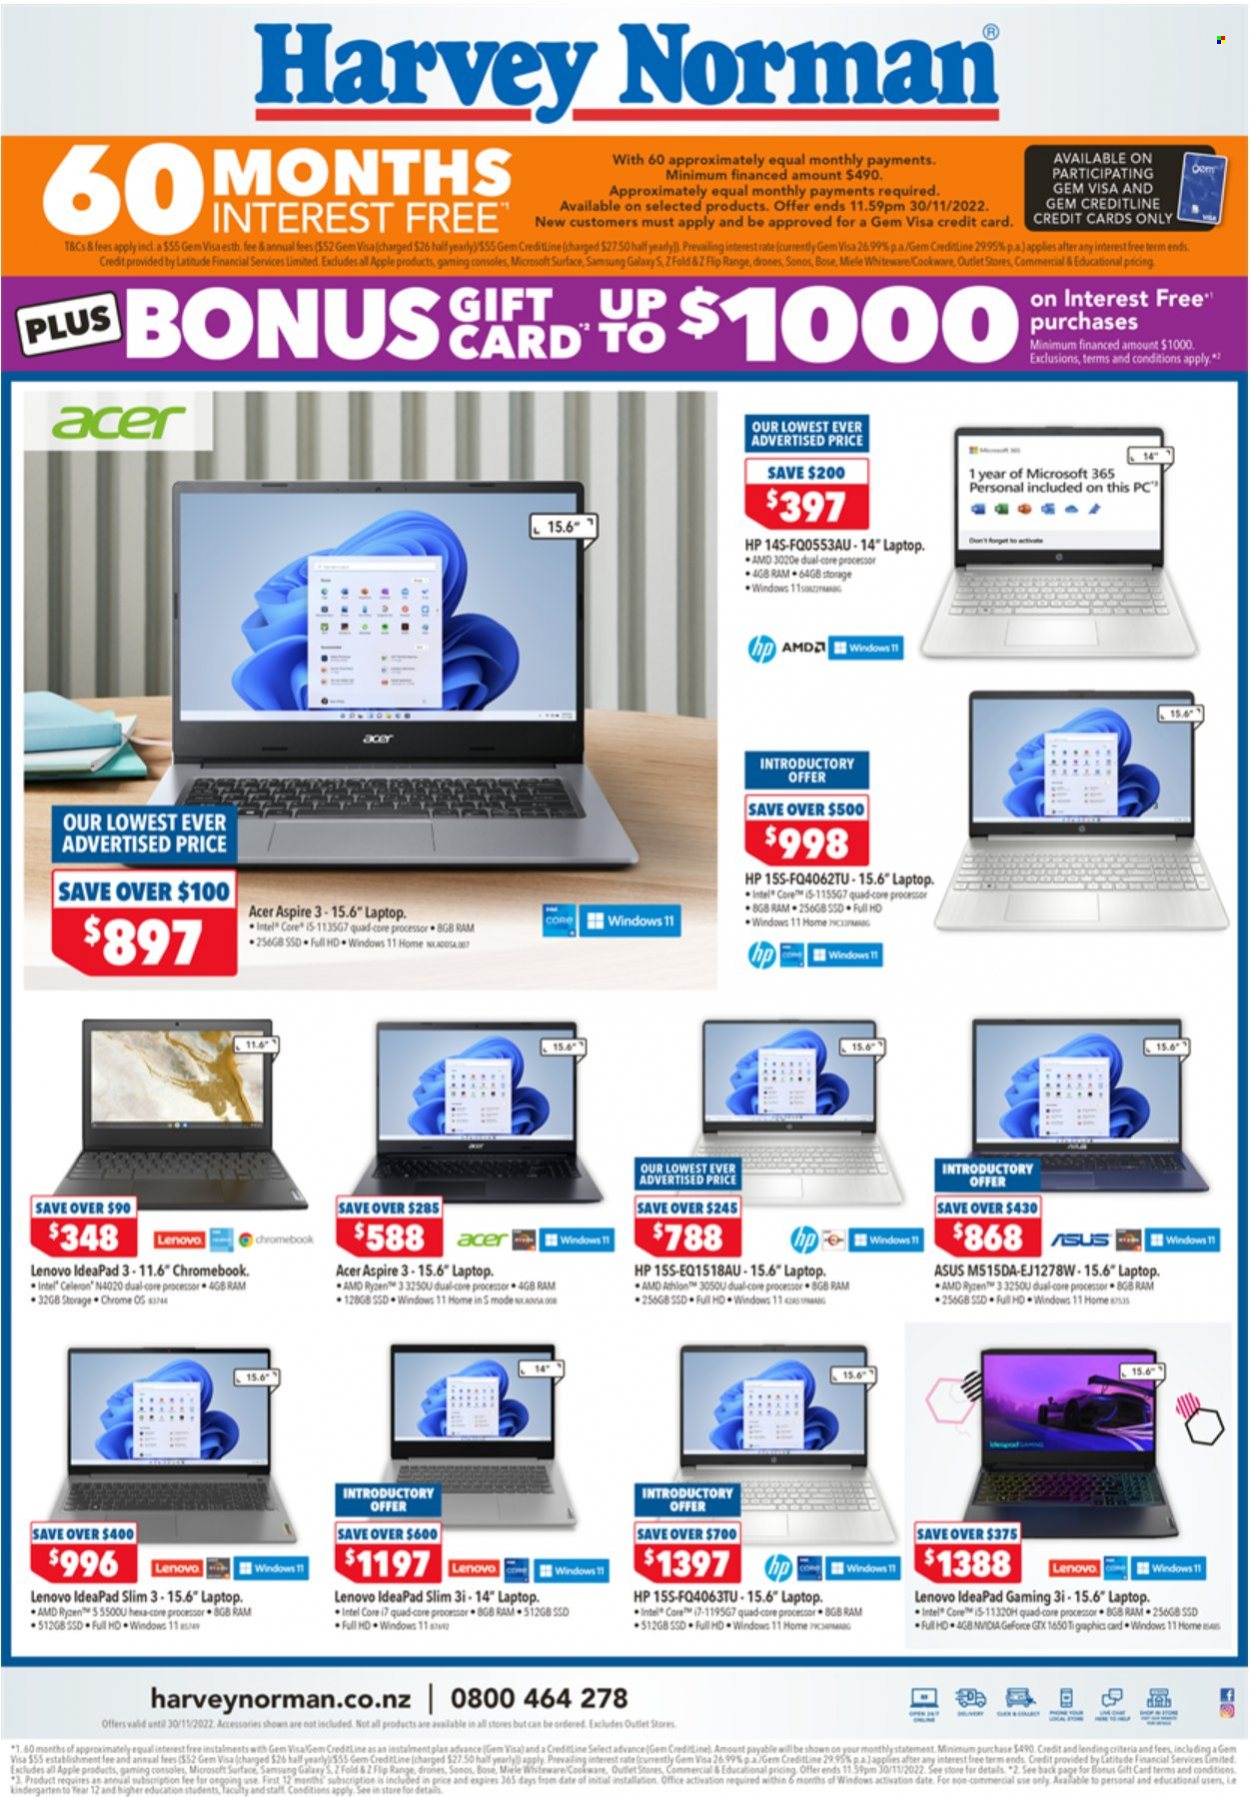 thumbnail - Harvey Norman mailer - 25.11.2022 - 27.11.2022 - Sales products - Apple, Intel, Acer, Asus, Lenovo, Hewlett Packard, Samsung Galaxy, drone, Samsung, Samsung Galaxy S, laptop, chromebook, GeForce, Sonos, BOSE, Miele. Page 2.